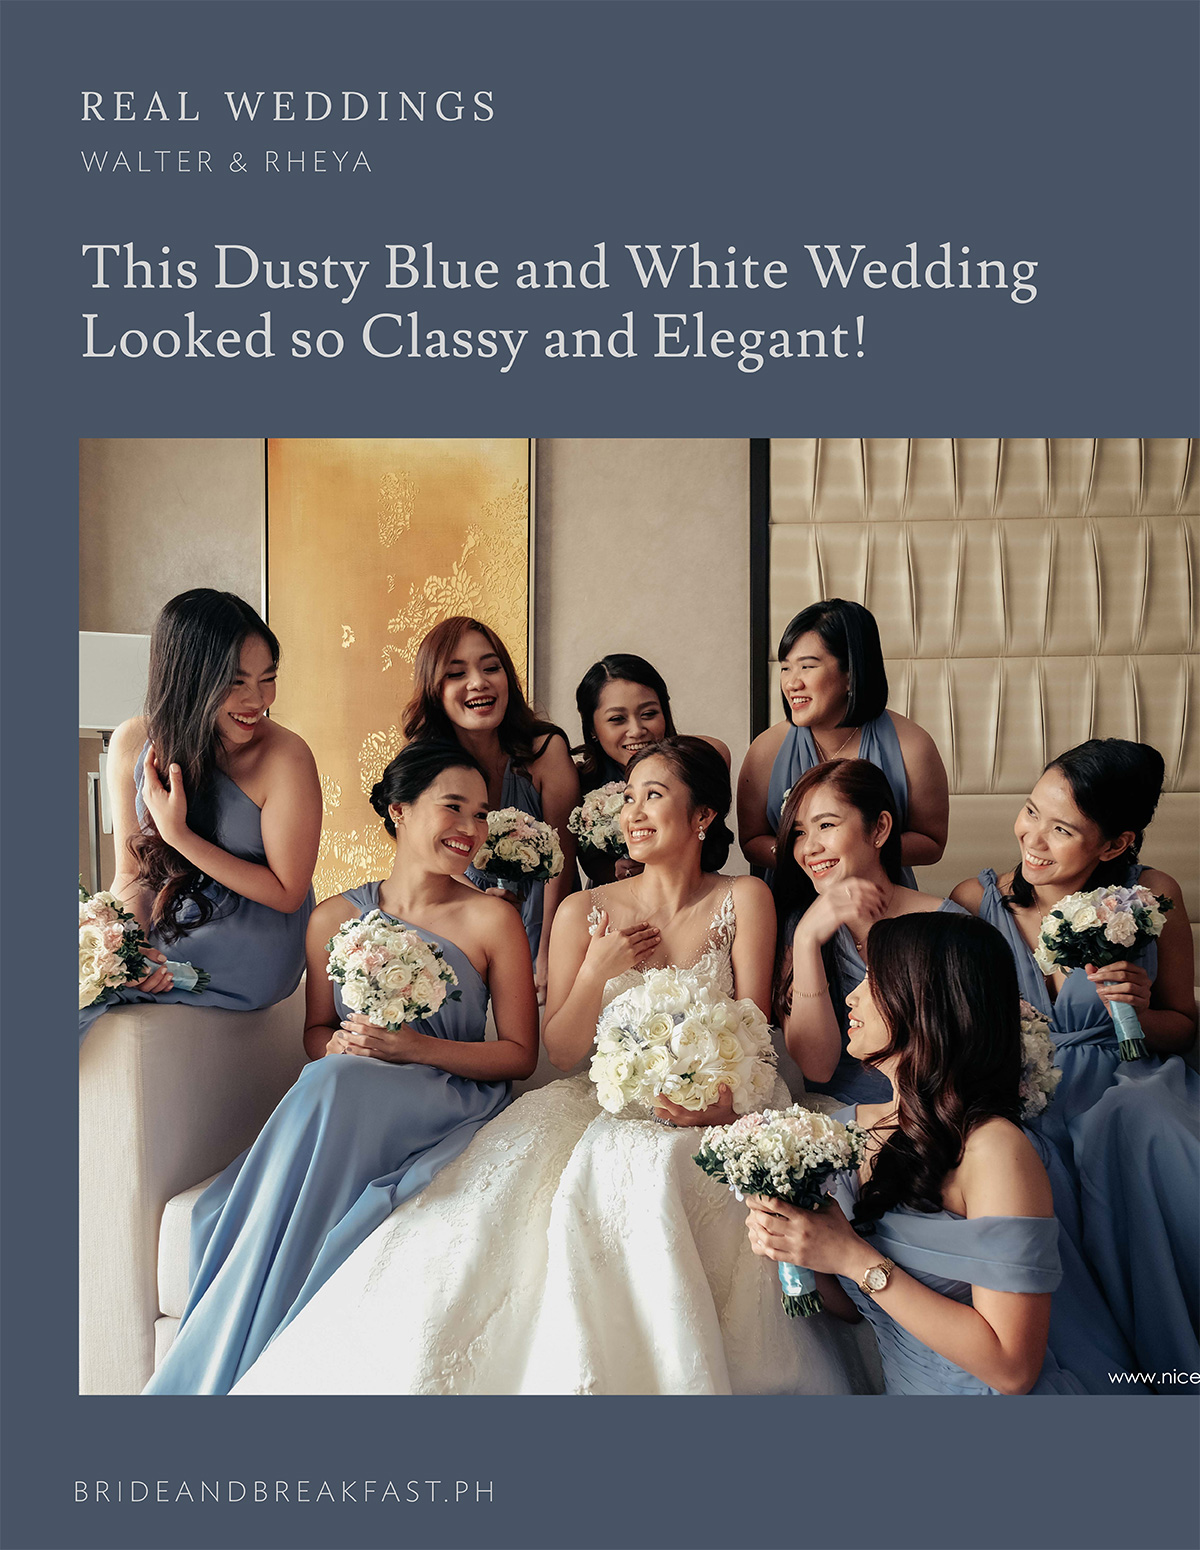 This Dusty Blue and White Wedding Looked so Classy and Elegant!